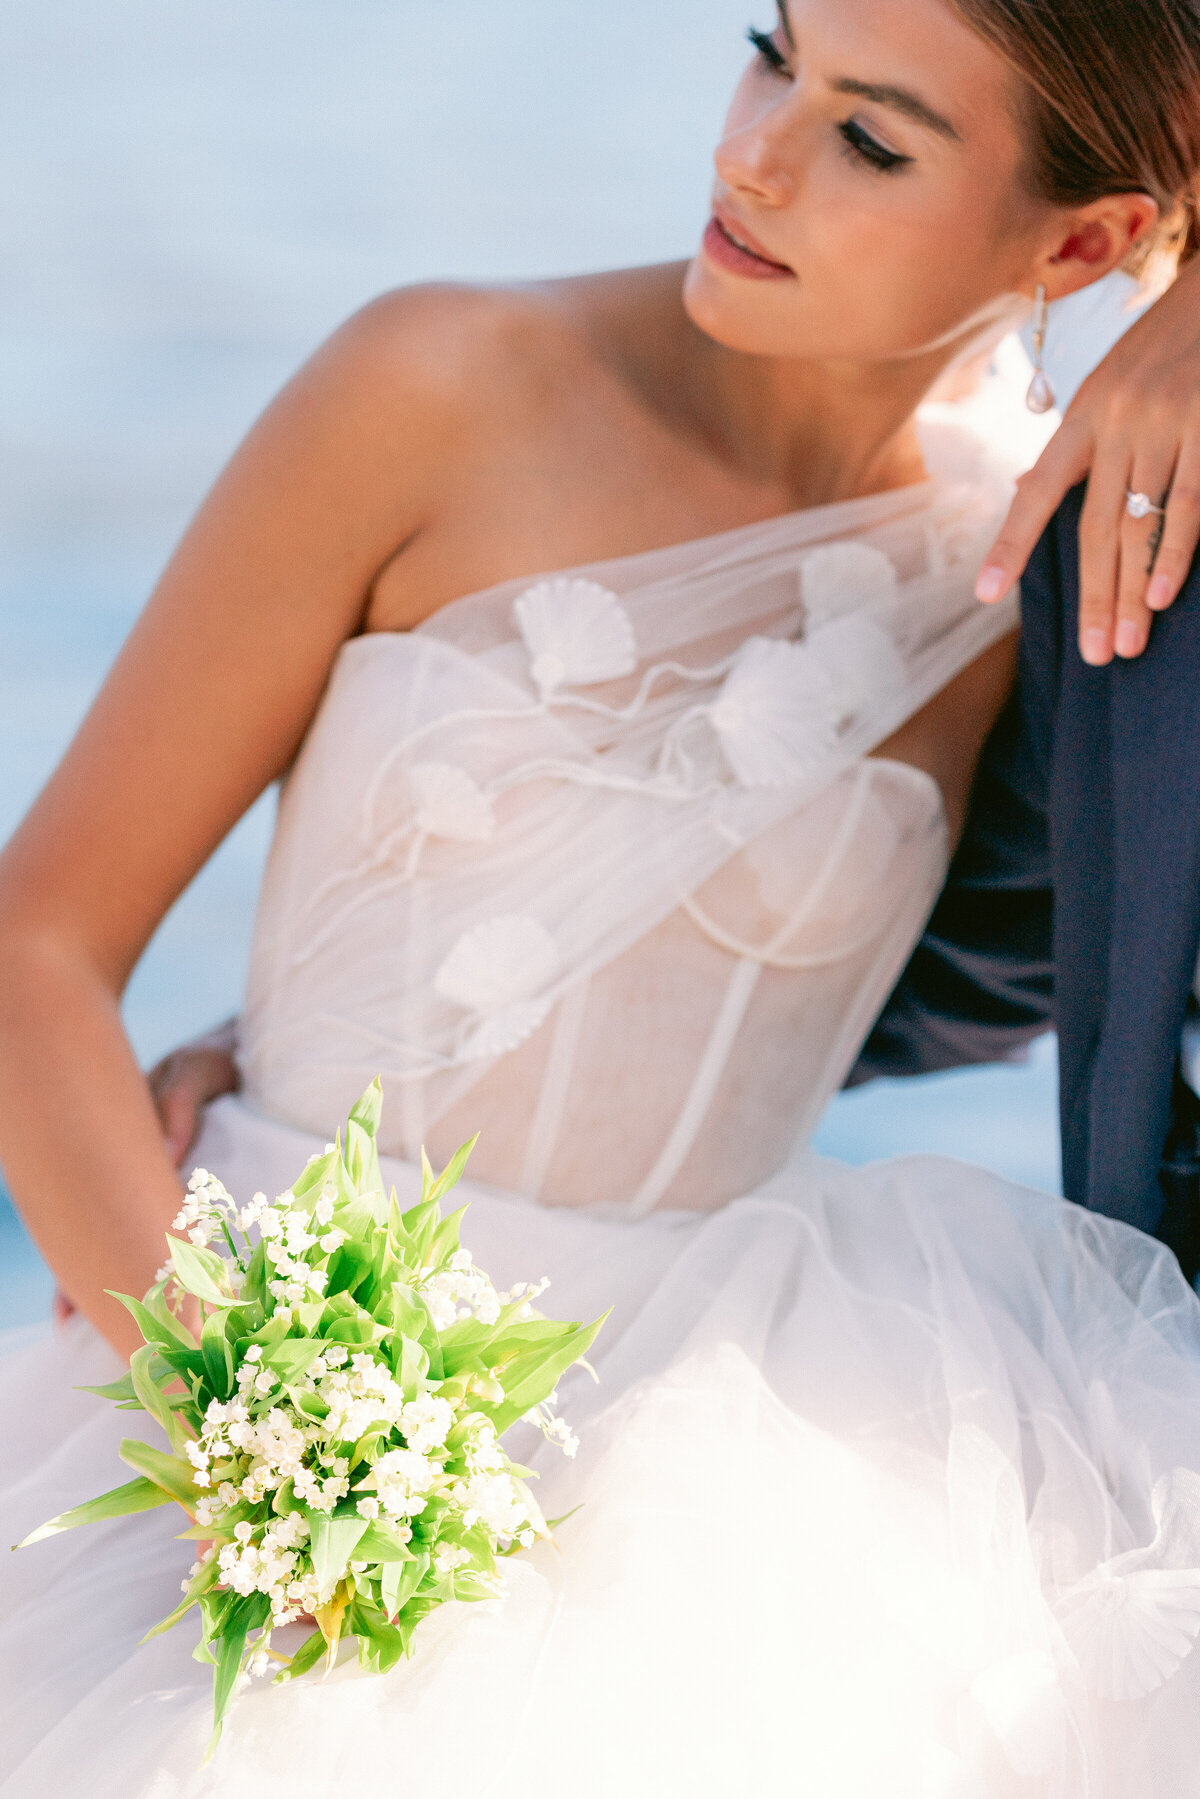 Bride holding a small bouquet of white florals with greenery with groom